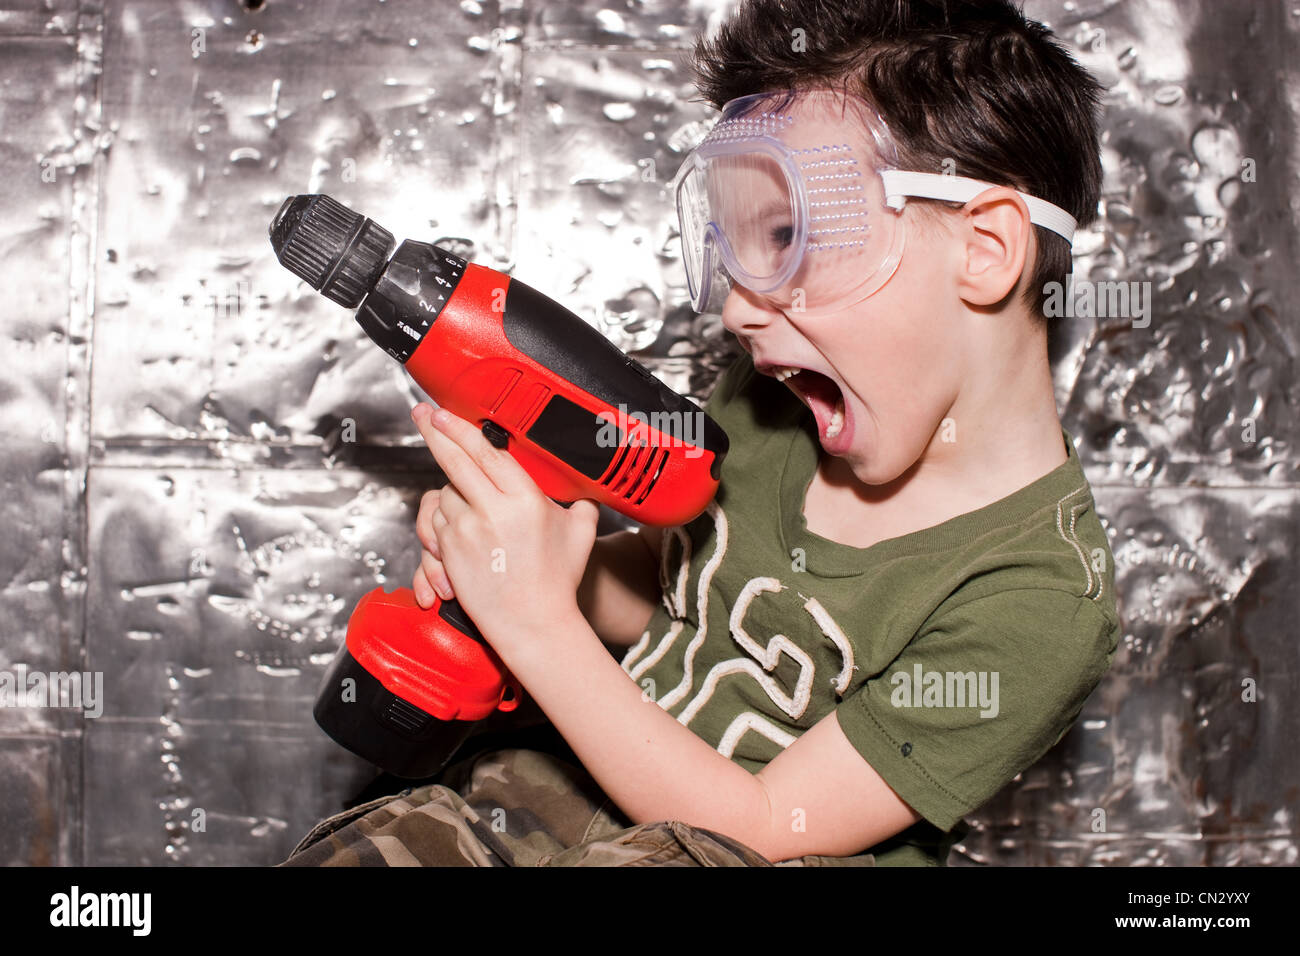 Boy with power tool and safety goggles Stock Photo